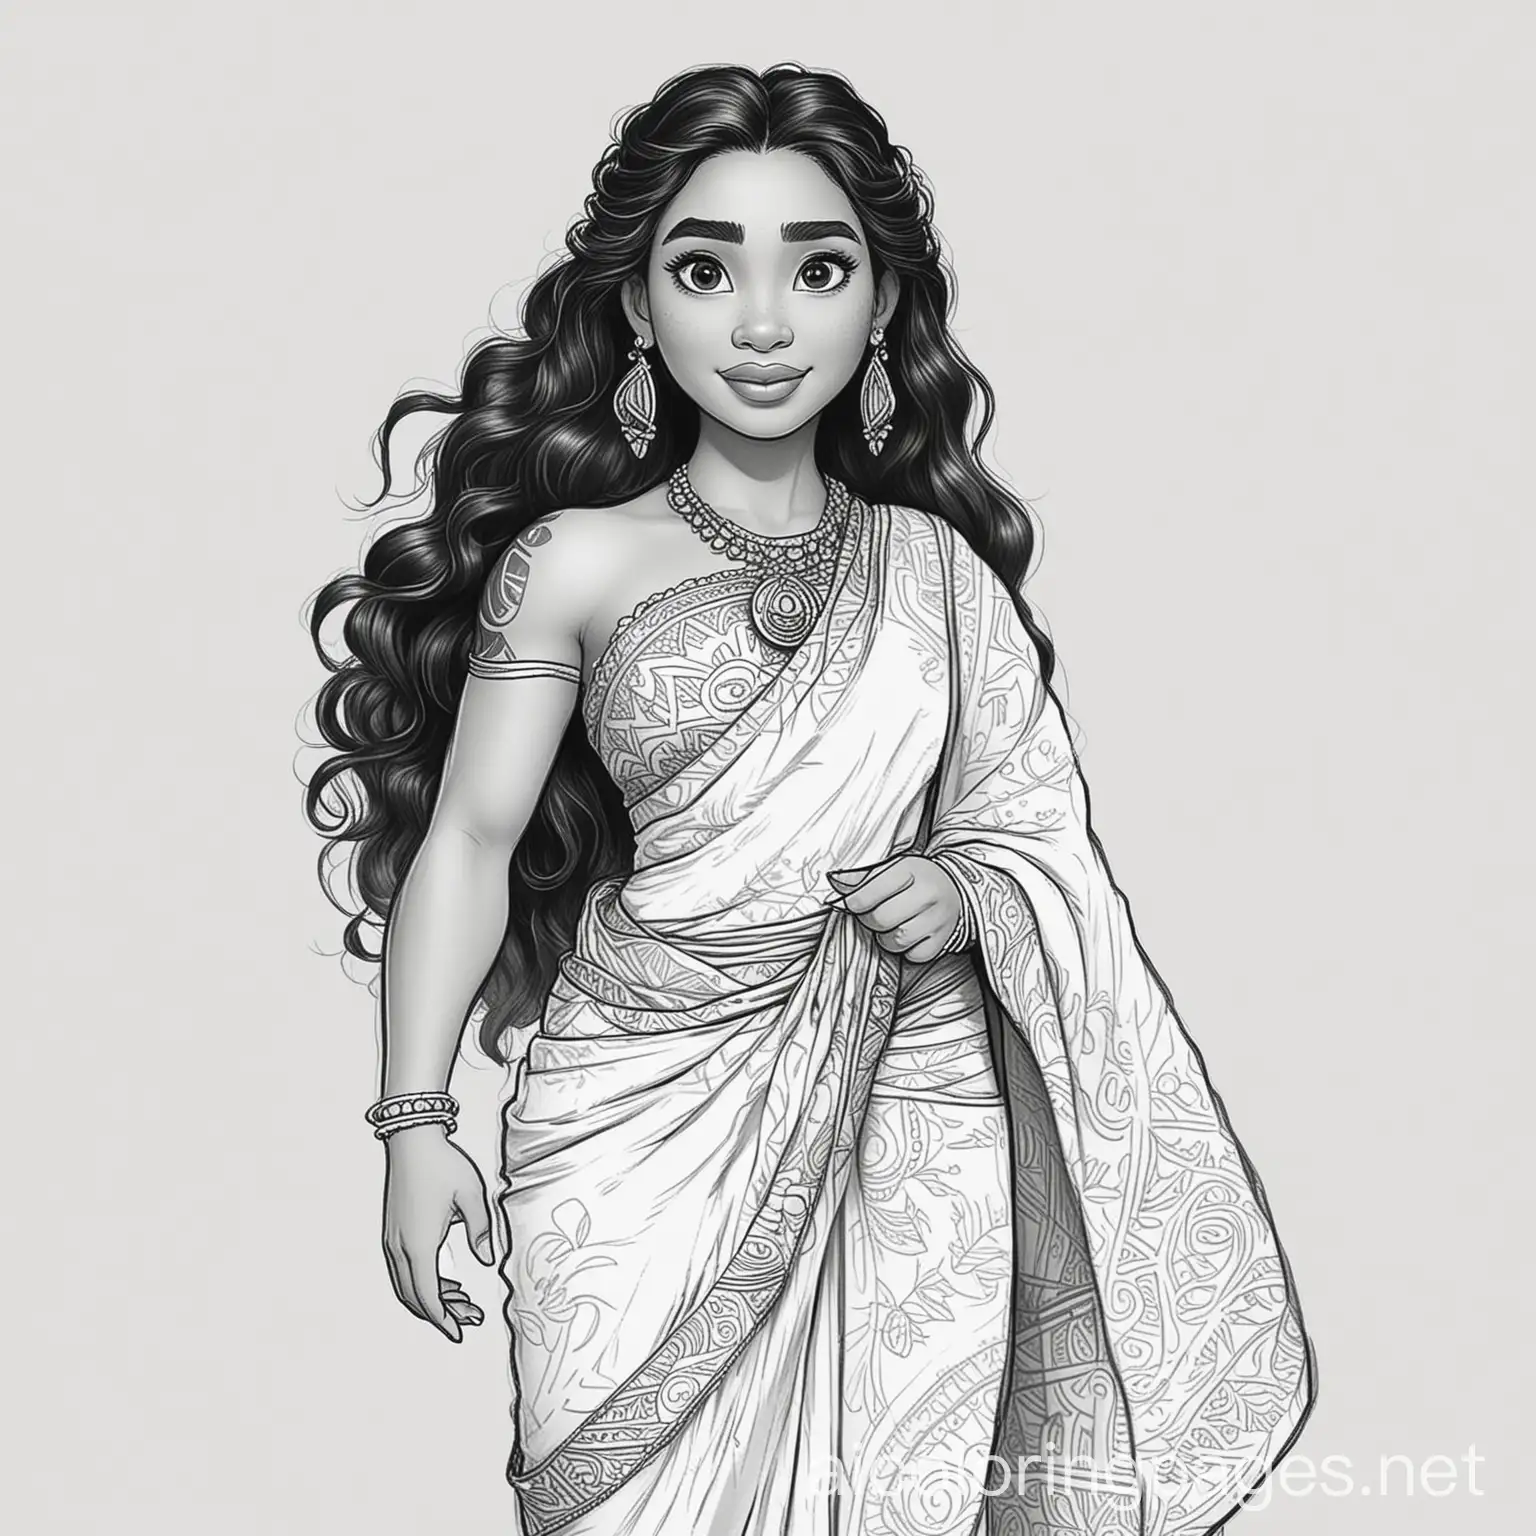 Princess Moana with sari, Coloring Page, black and white, line art, white background, Simplicity, Ample White Space. The background of the coloring page is plain white to make it easy for young children to color within the lines. The outlines of all the subjects are easy to distinguish, making it simple for kids to color without too much difficulty